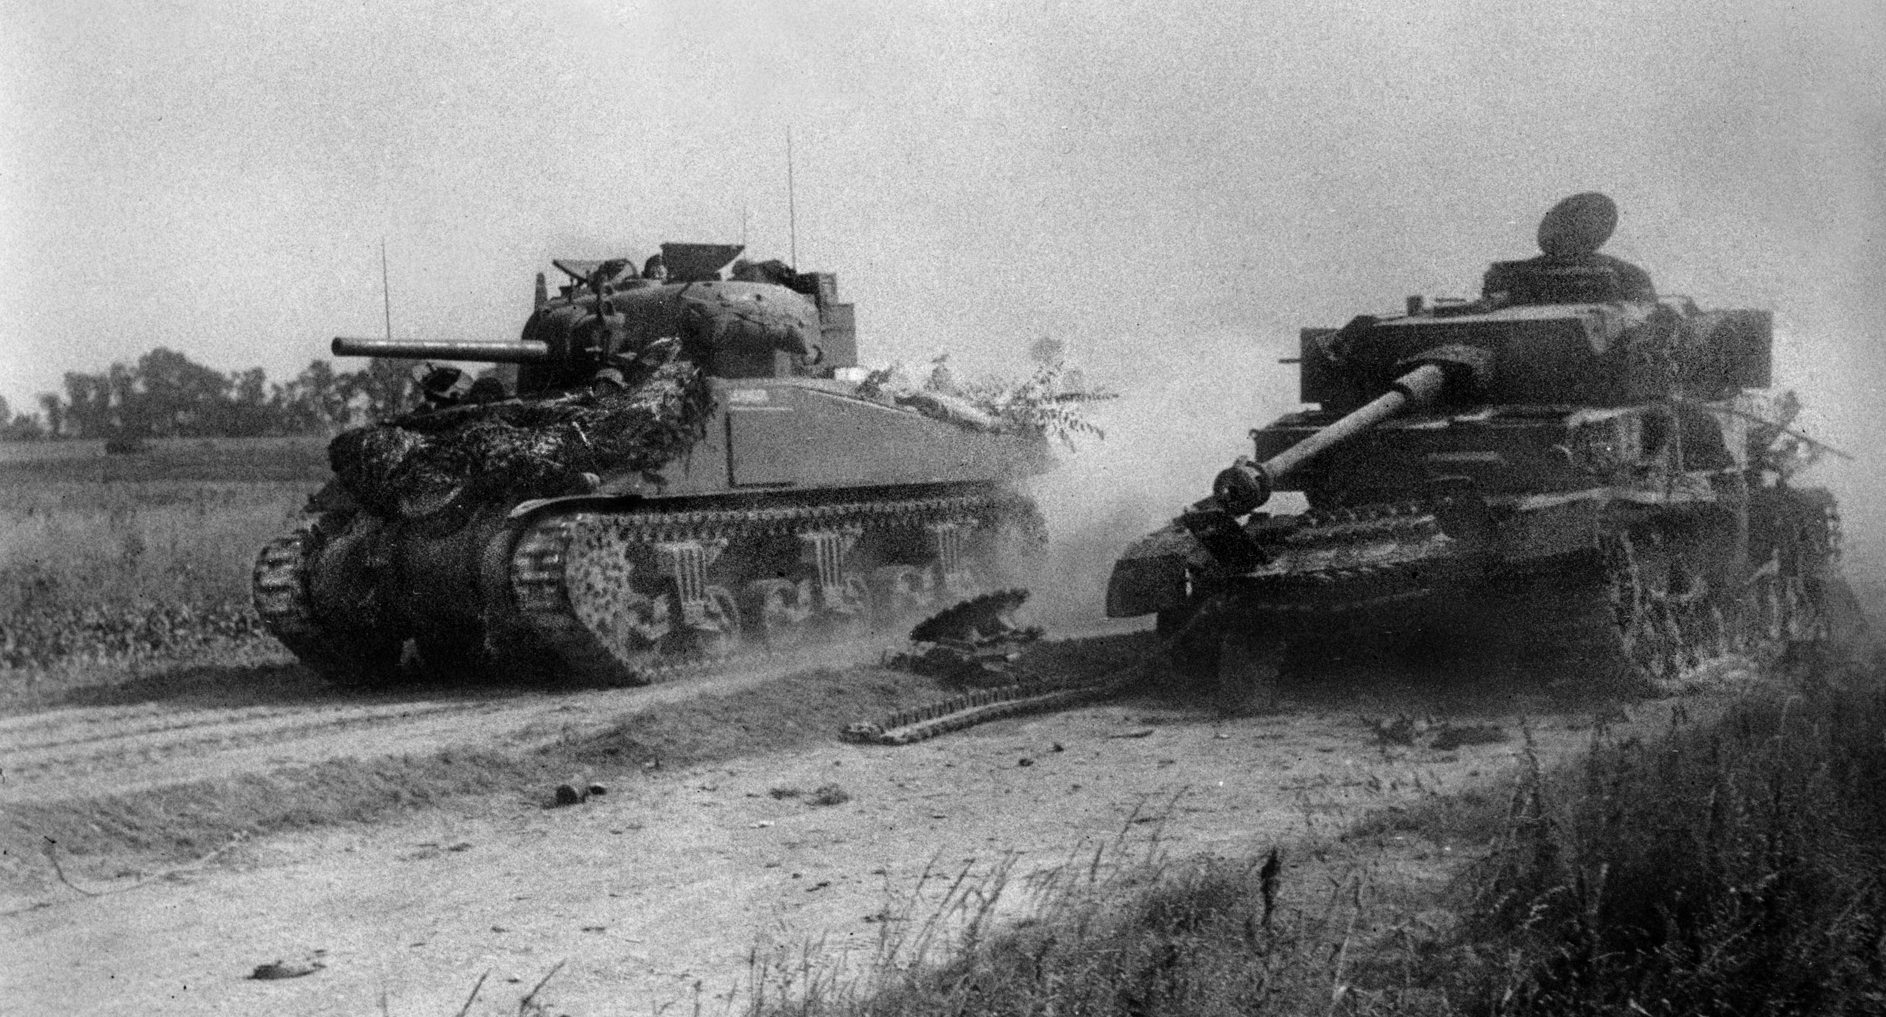 A British M4 Sherman medium tank races past a knocked-out German PzKpfw. IV tank during the desperate fight for control of the crossroads and communications hub of Caen during the weeks after D-Day. Allied planners had projected that Caen would be in British hands on D-Day itself; however, a month of bitter fighting was required for Allied forces to capture the town.